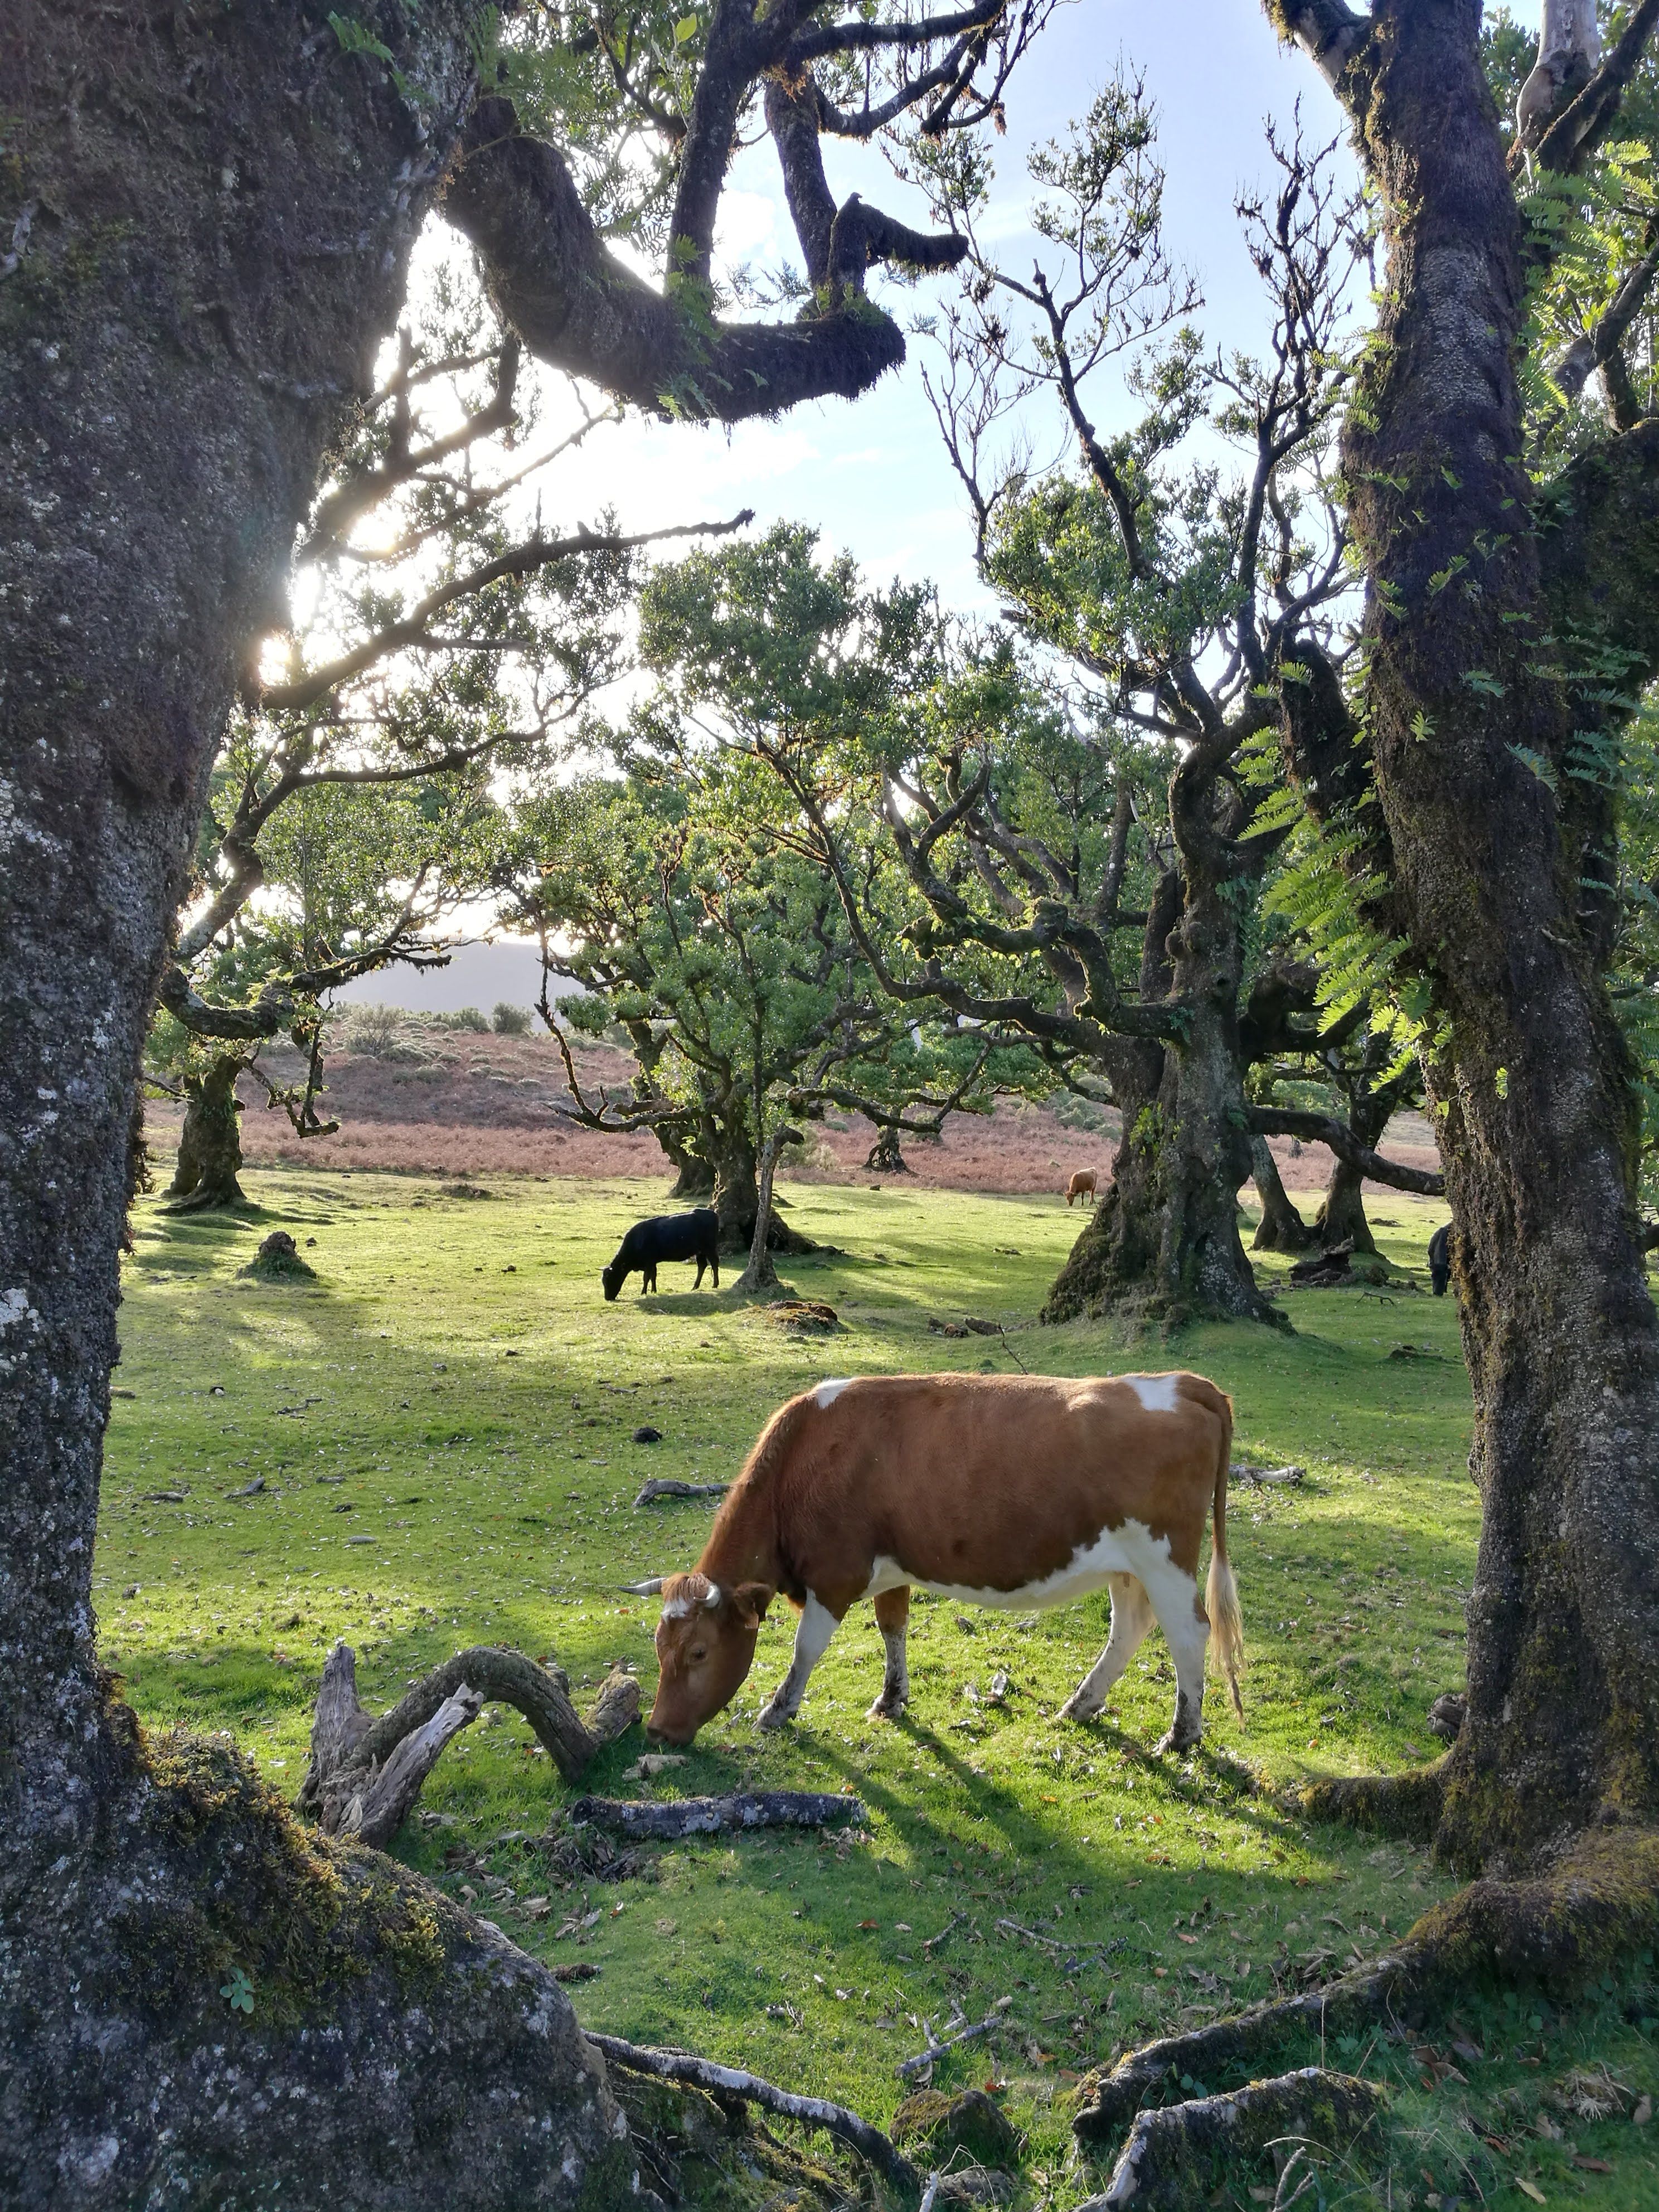 Tame cows graze under the laurissilva trees